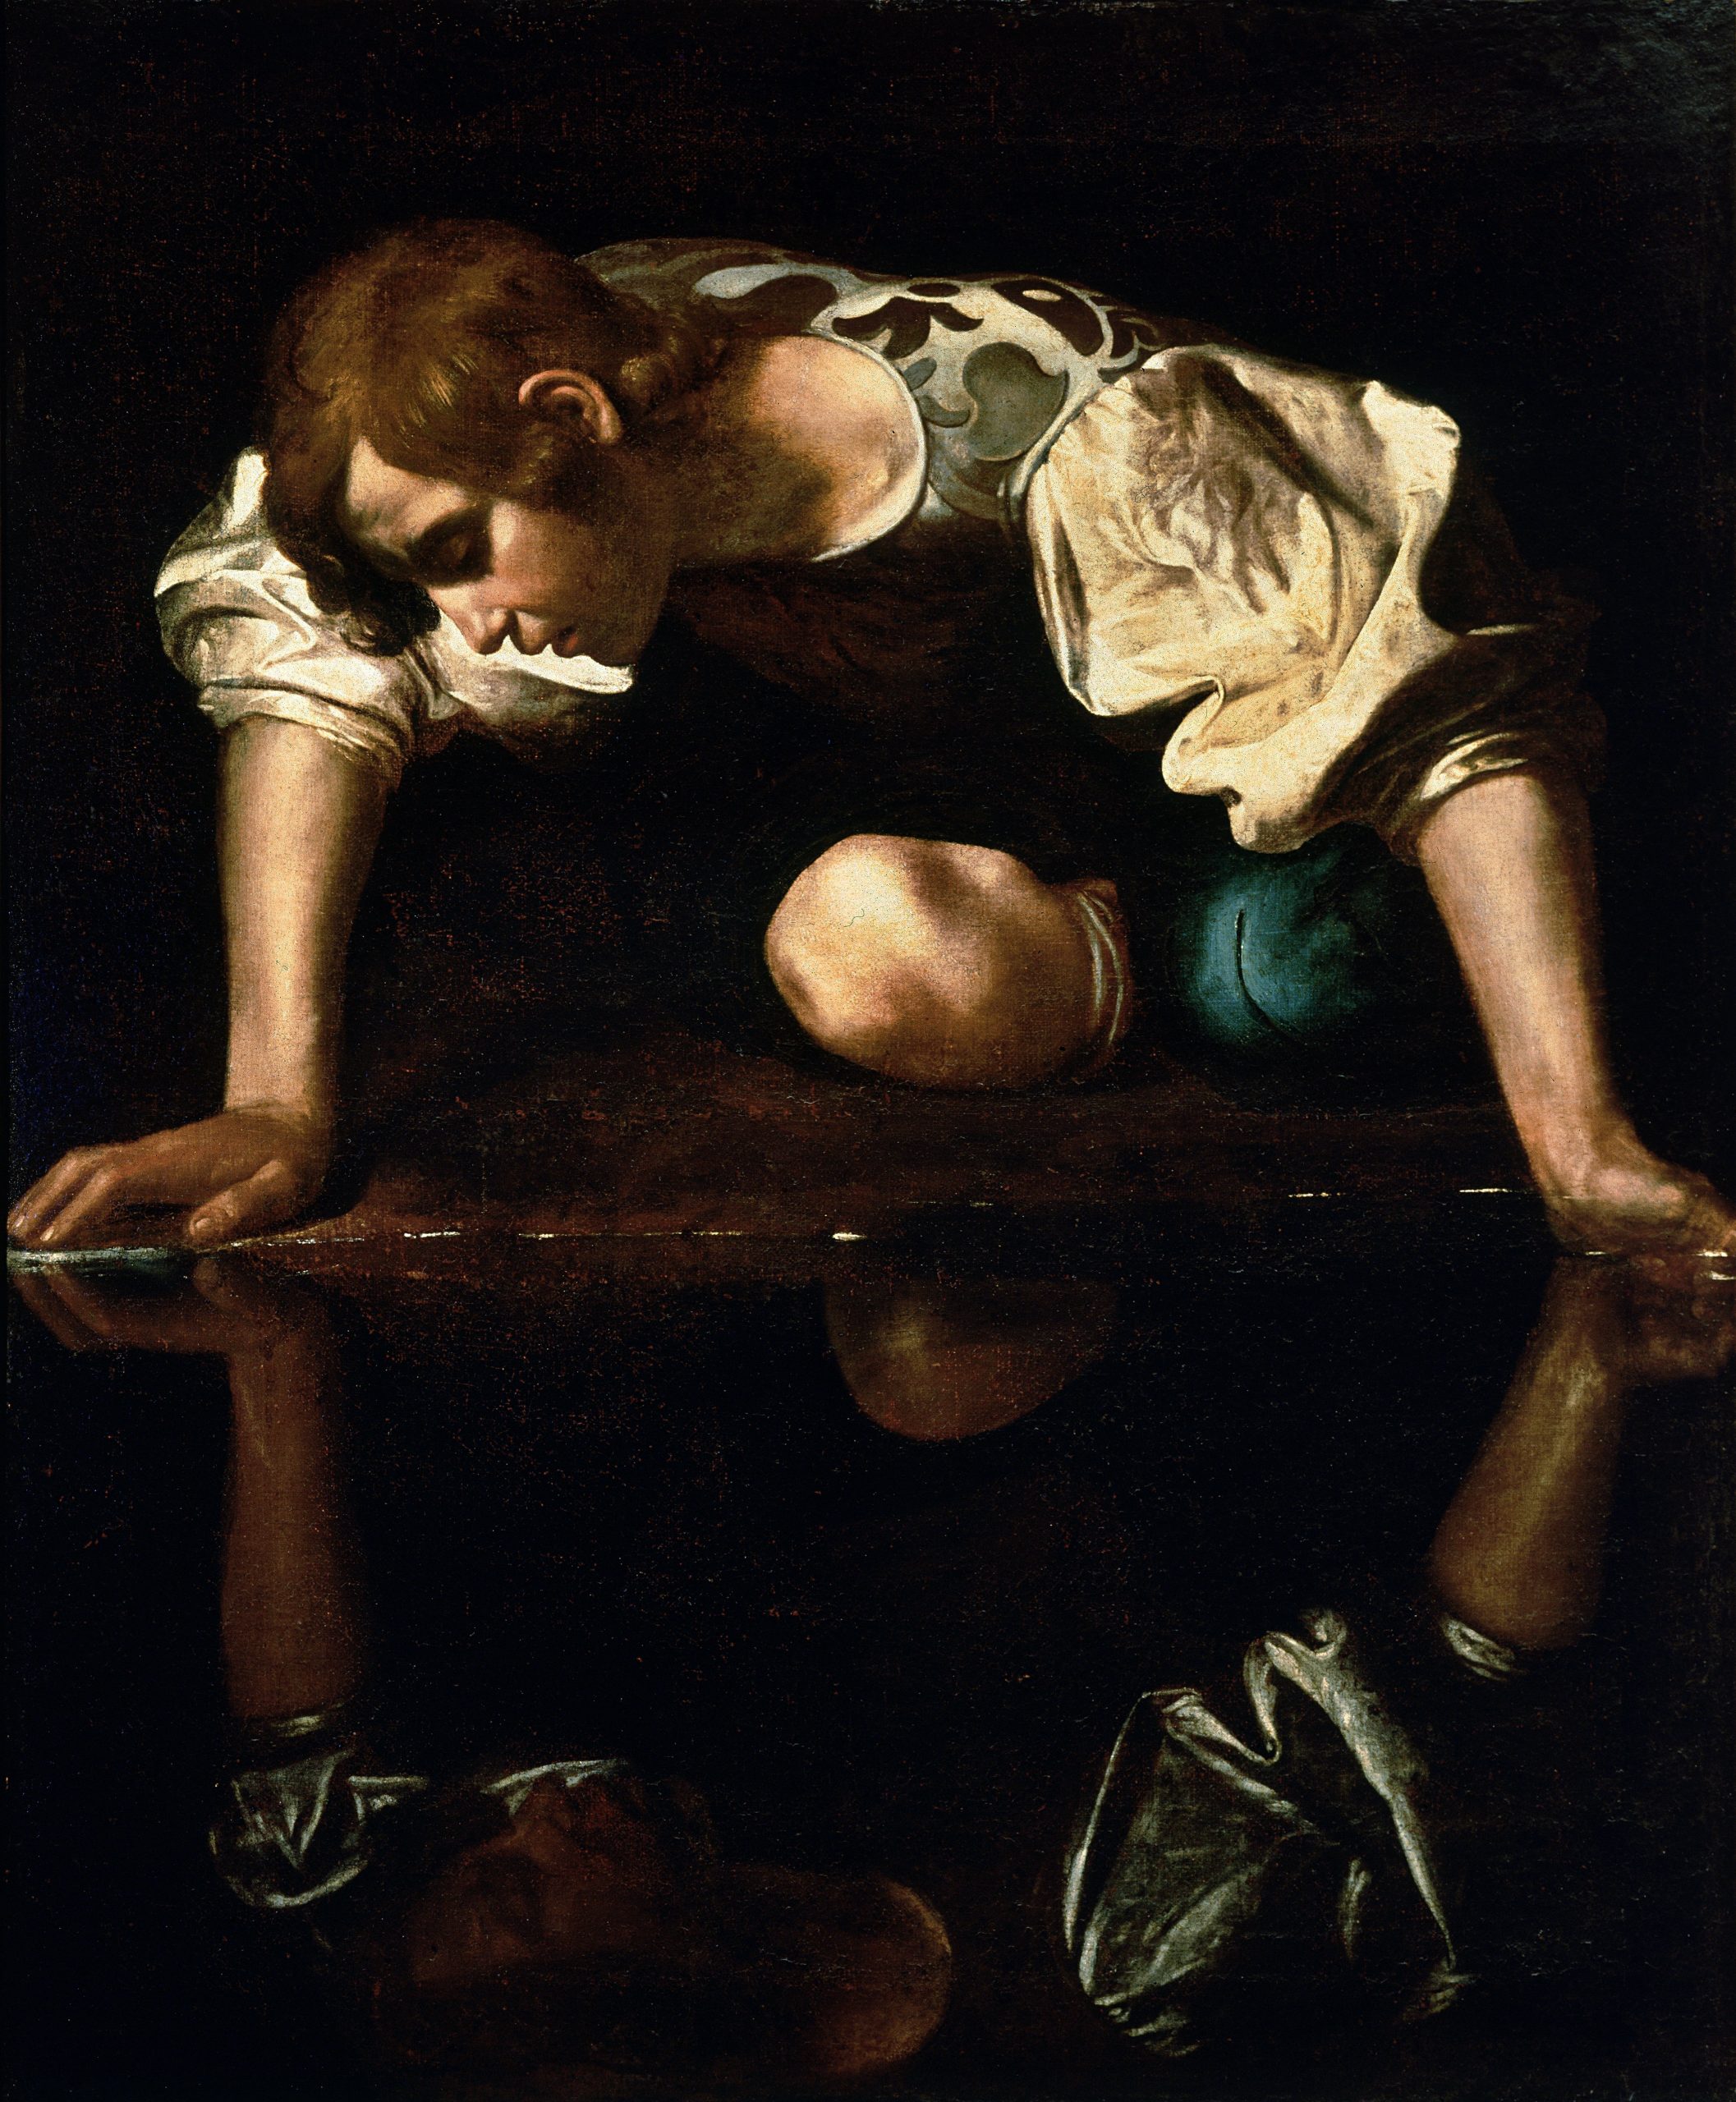 A painting of a man looking admirably at his reflection in a puddle.